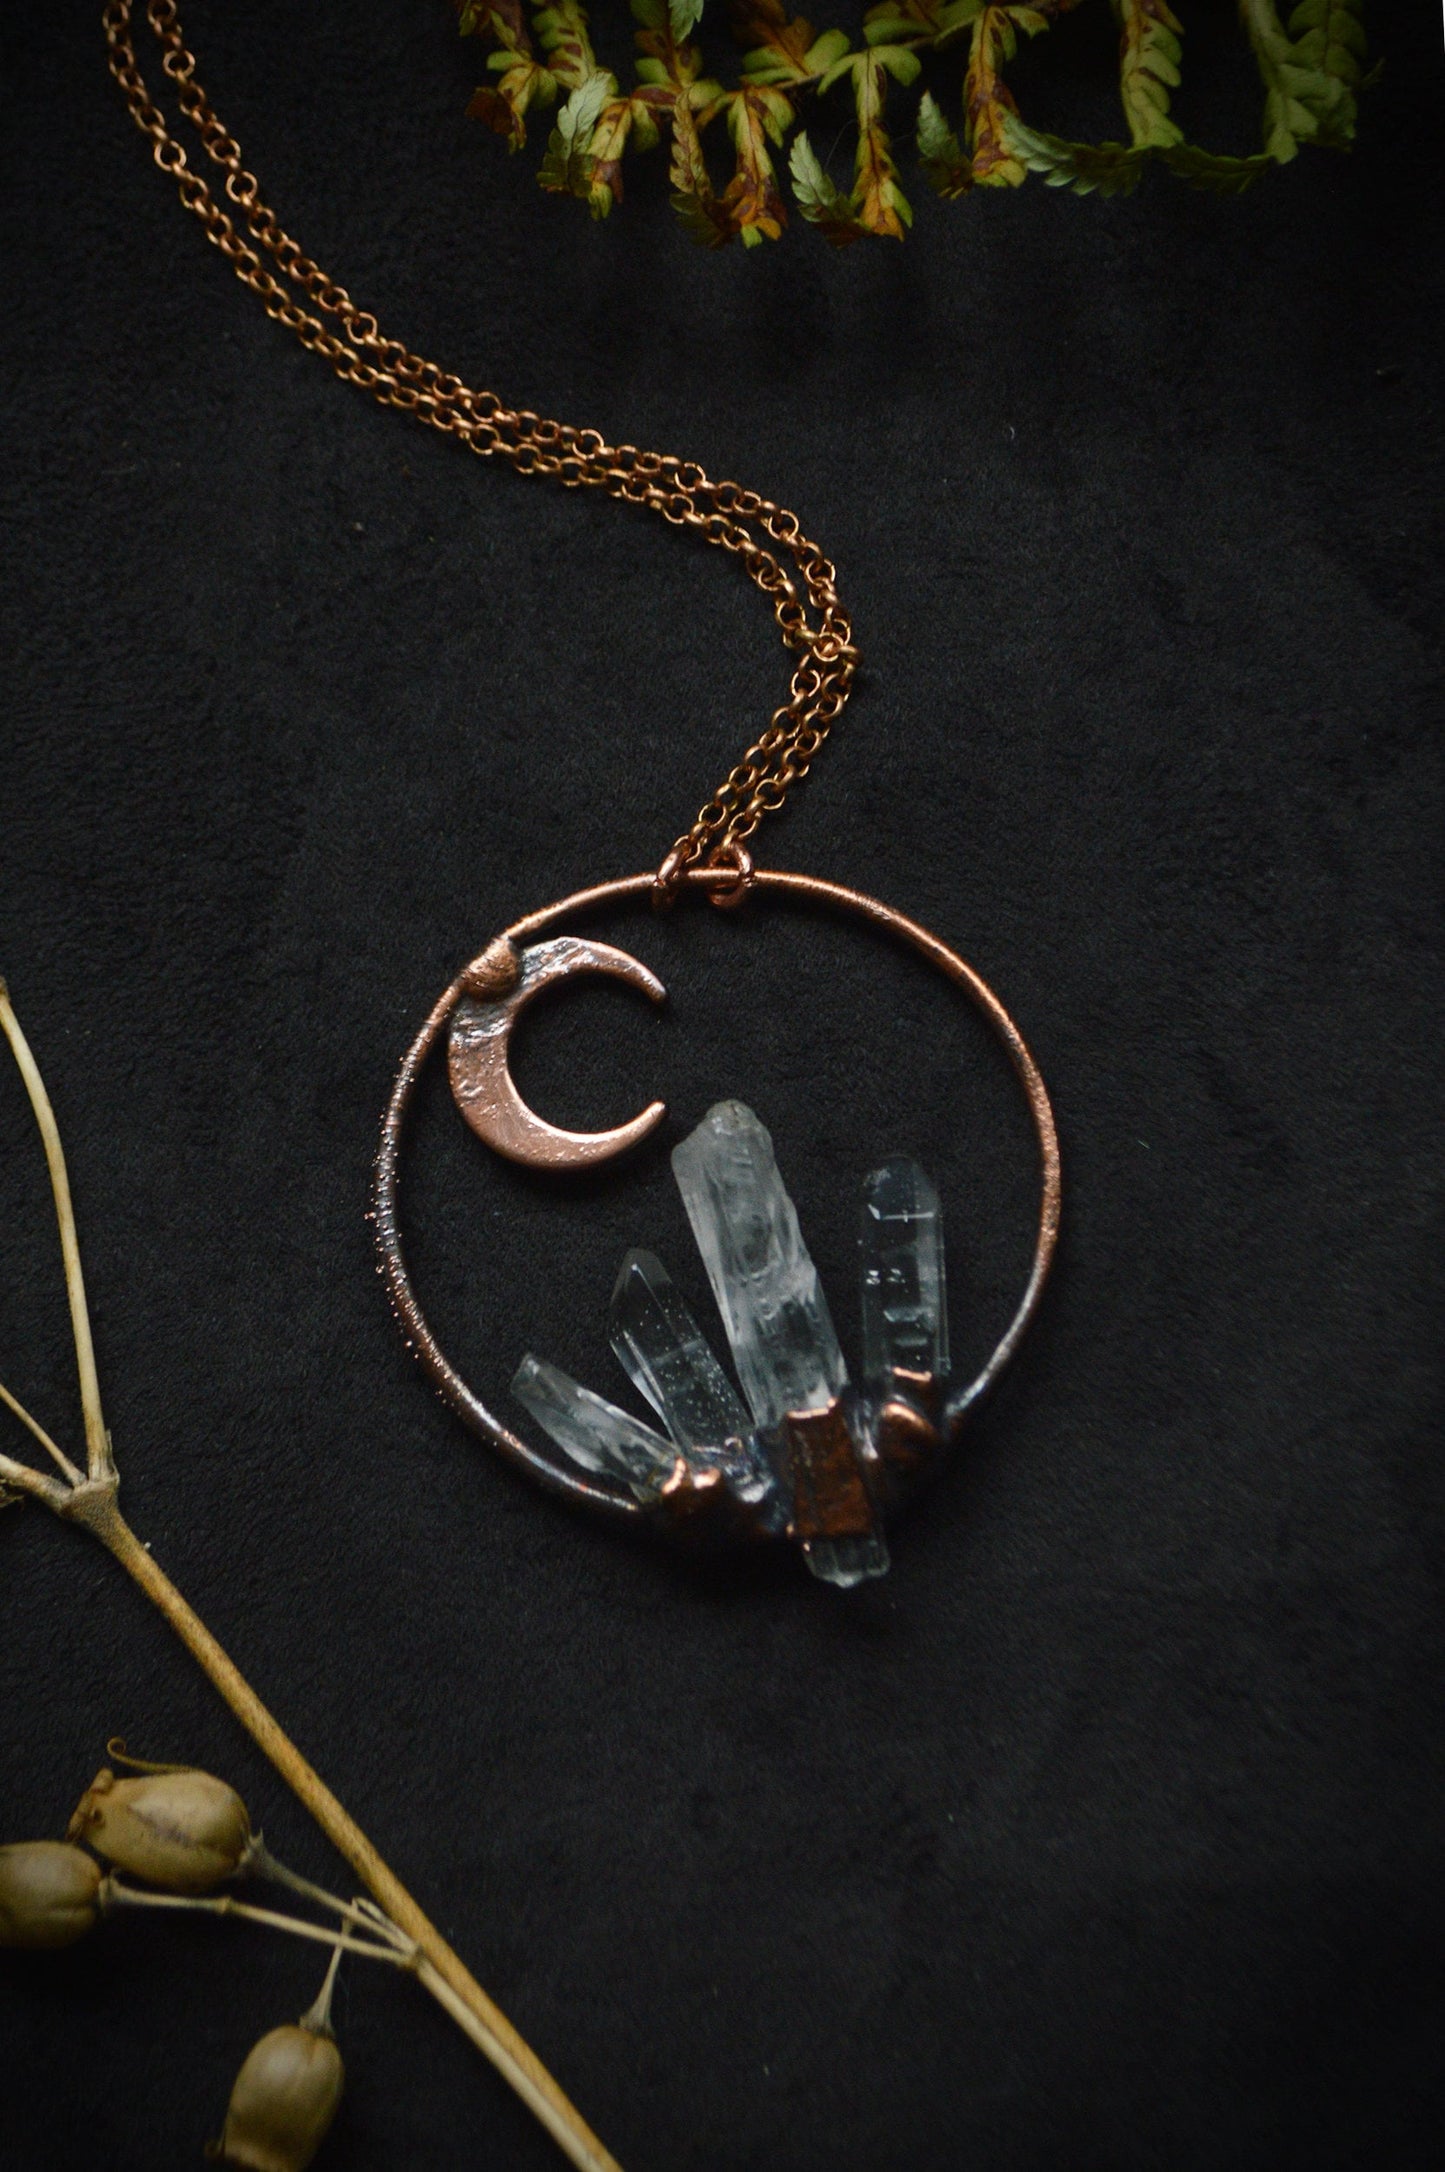 Copper crystal garden with quartz and crescent moon. Dreamy whimsical jewellery